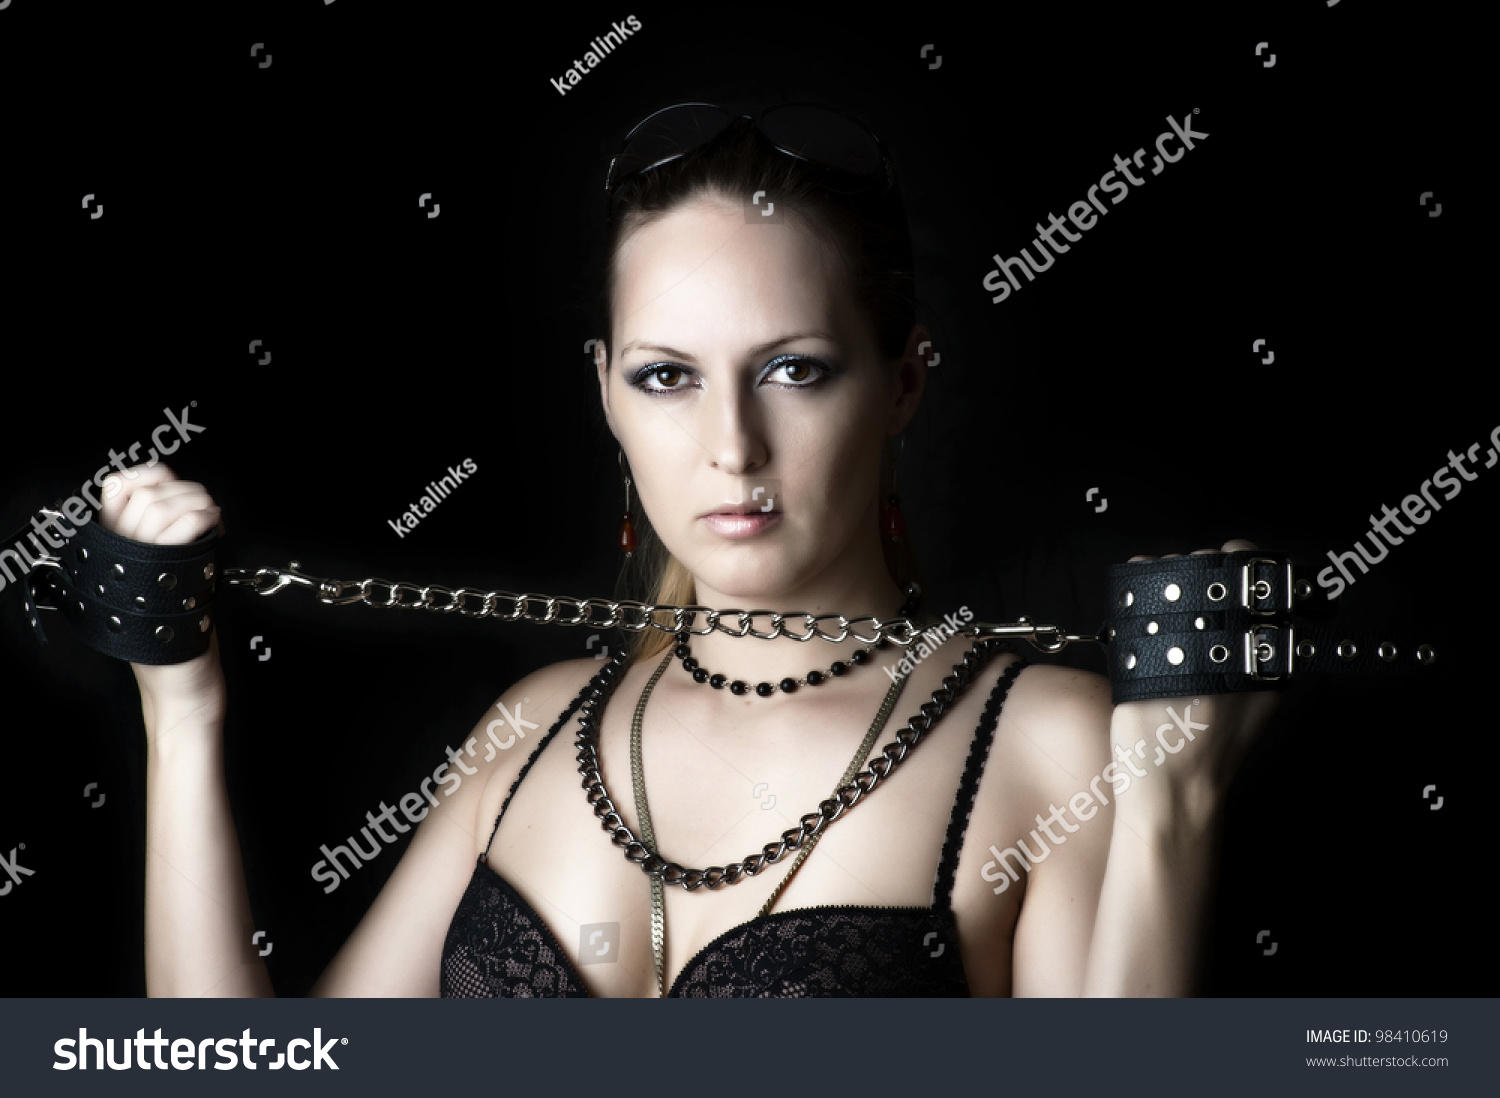 Sexy Woman Lady Or Madam In Bdsm Play With Handcuffs On Black